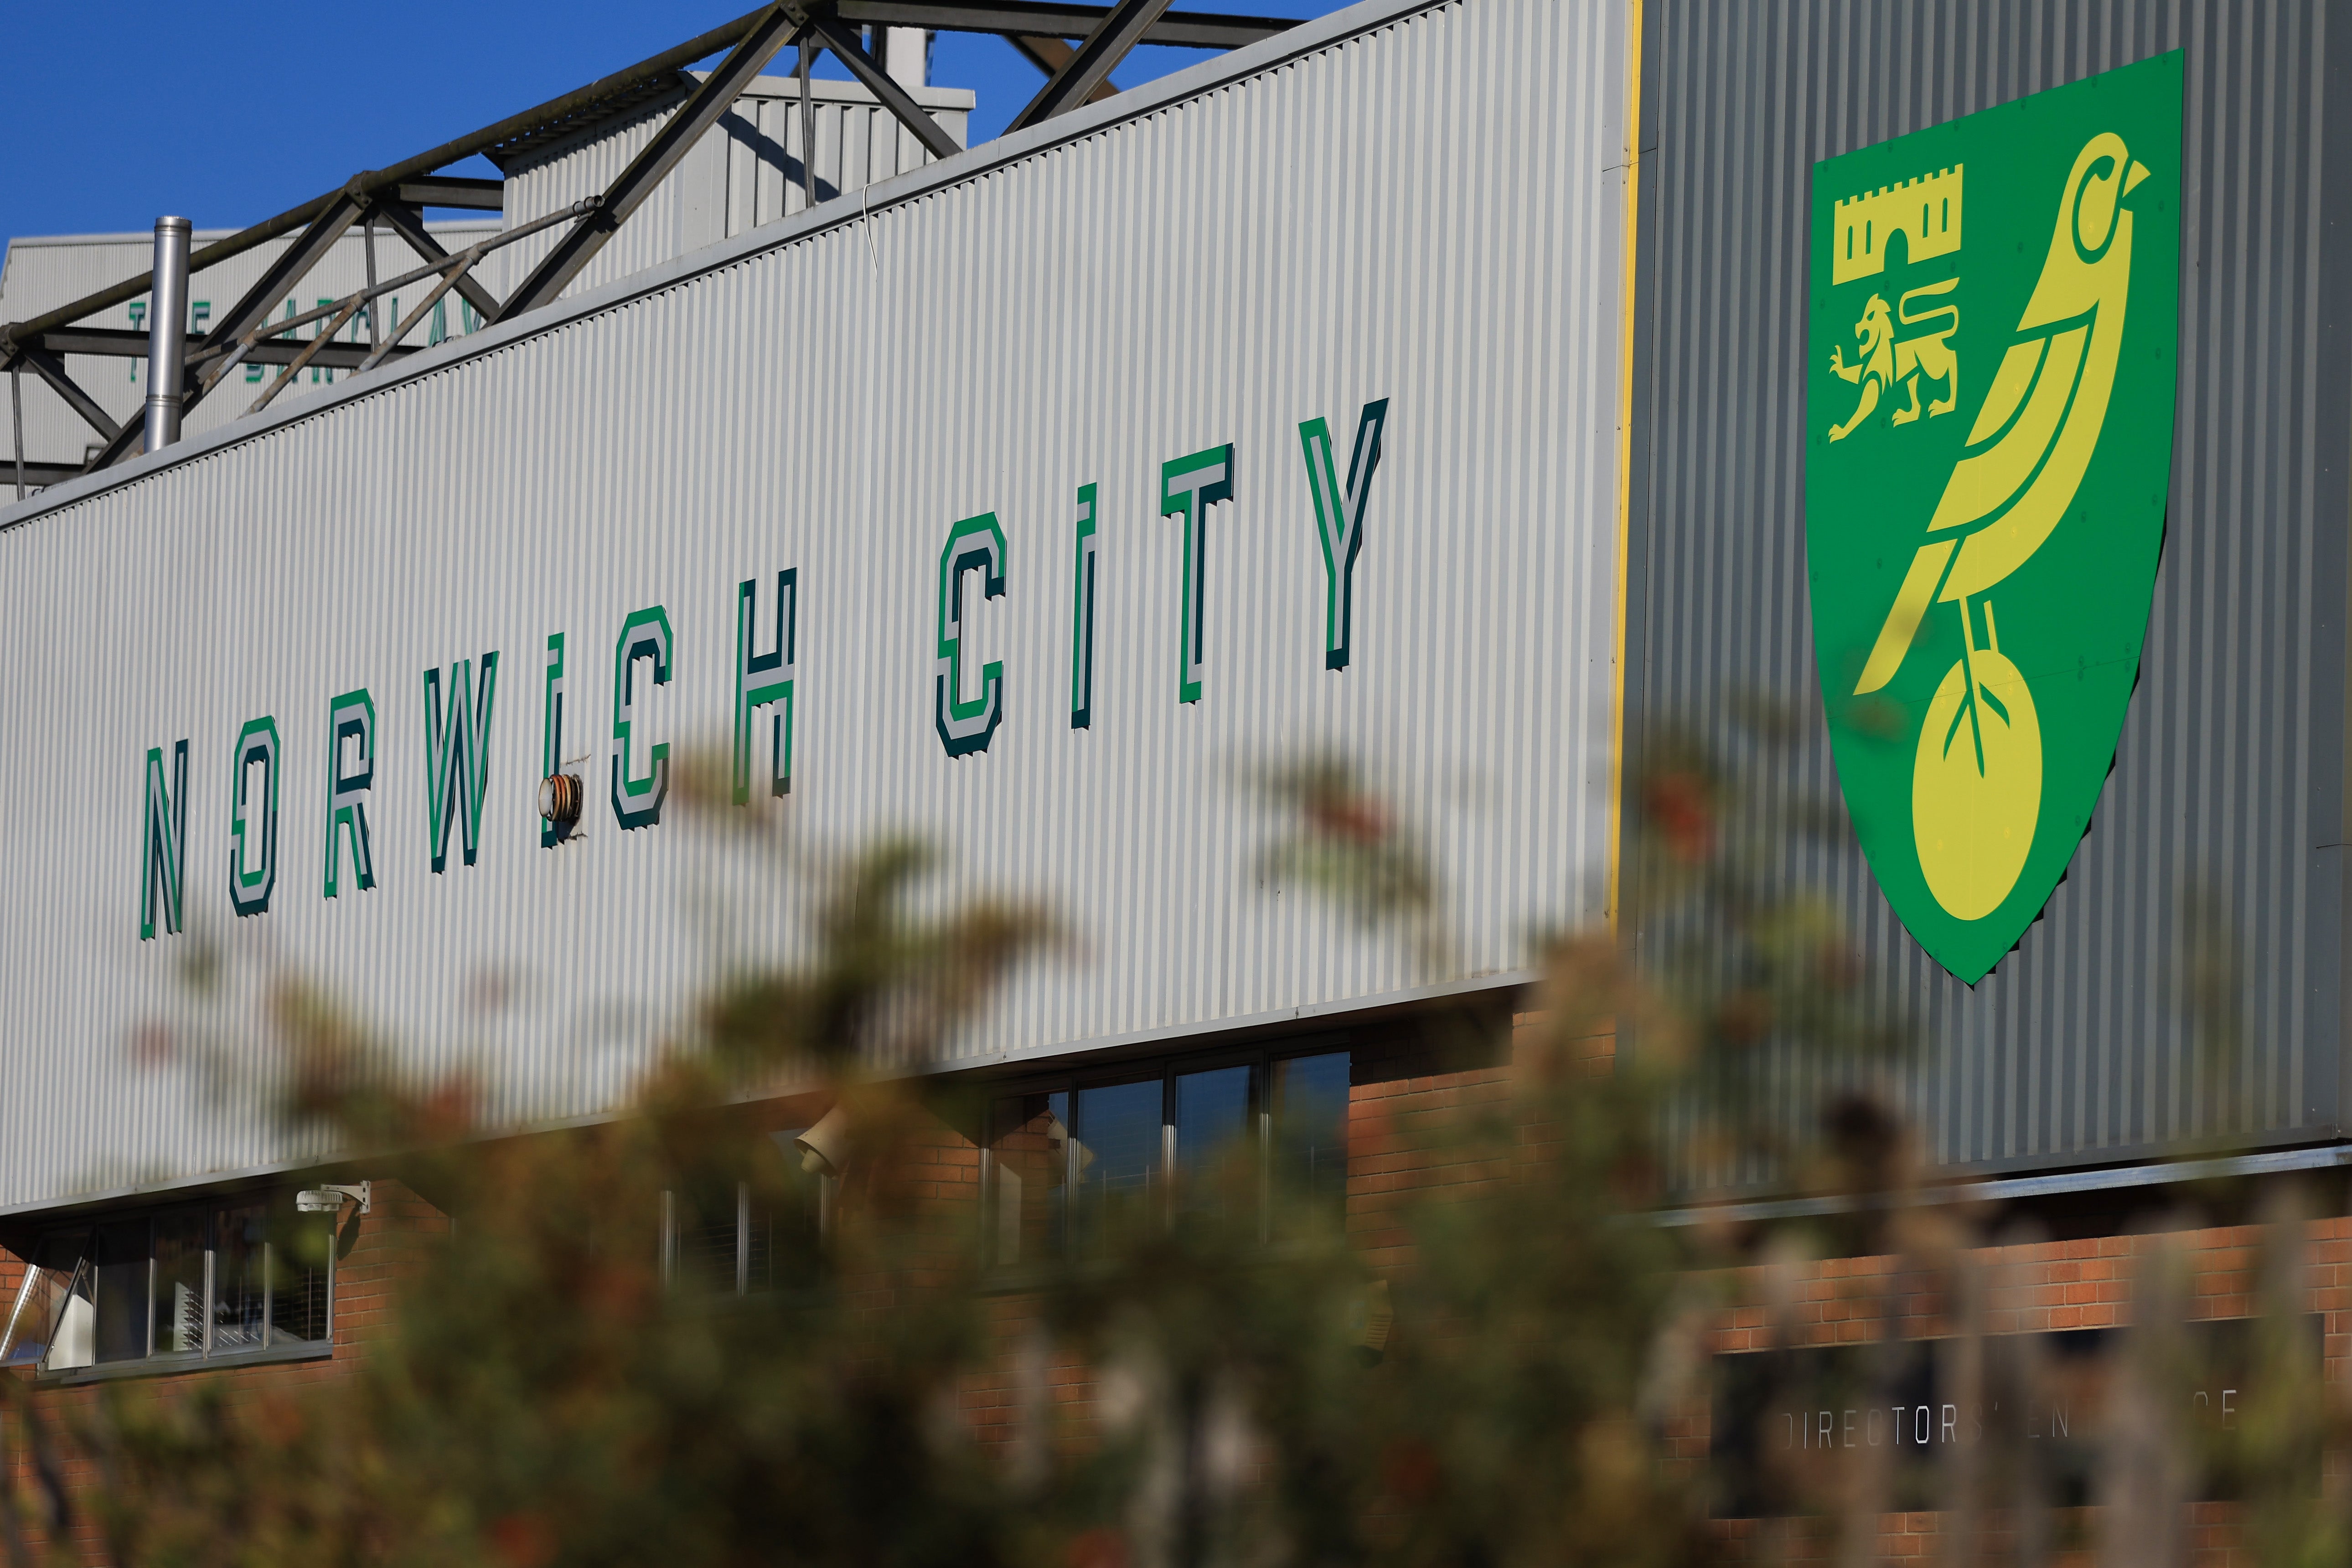 Two people have been arrested after an incident outside Carrow Road